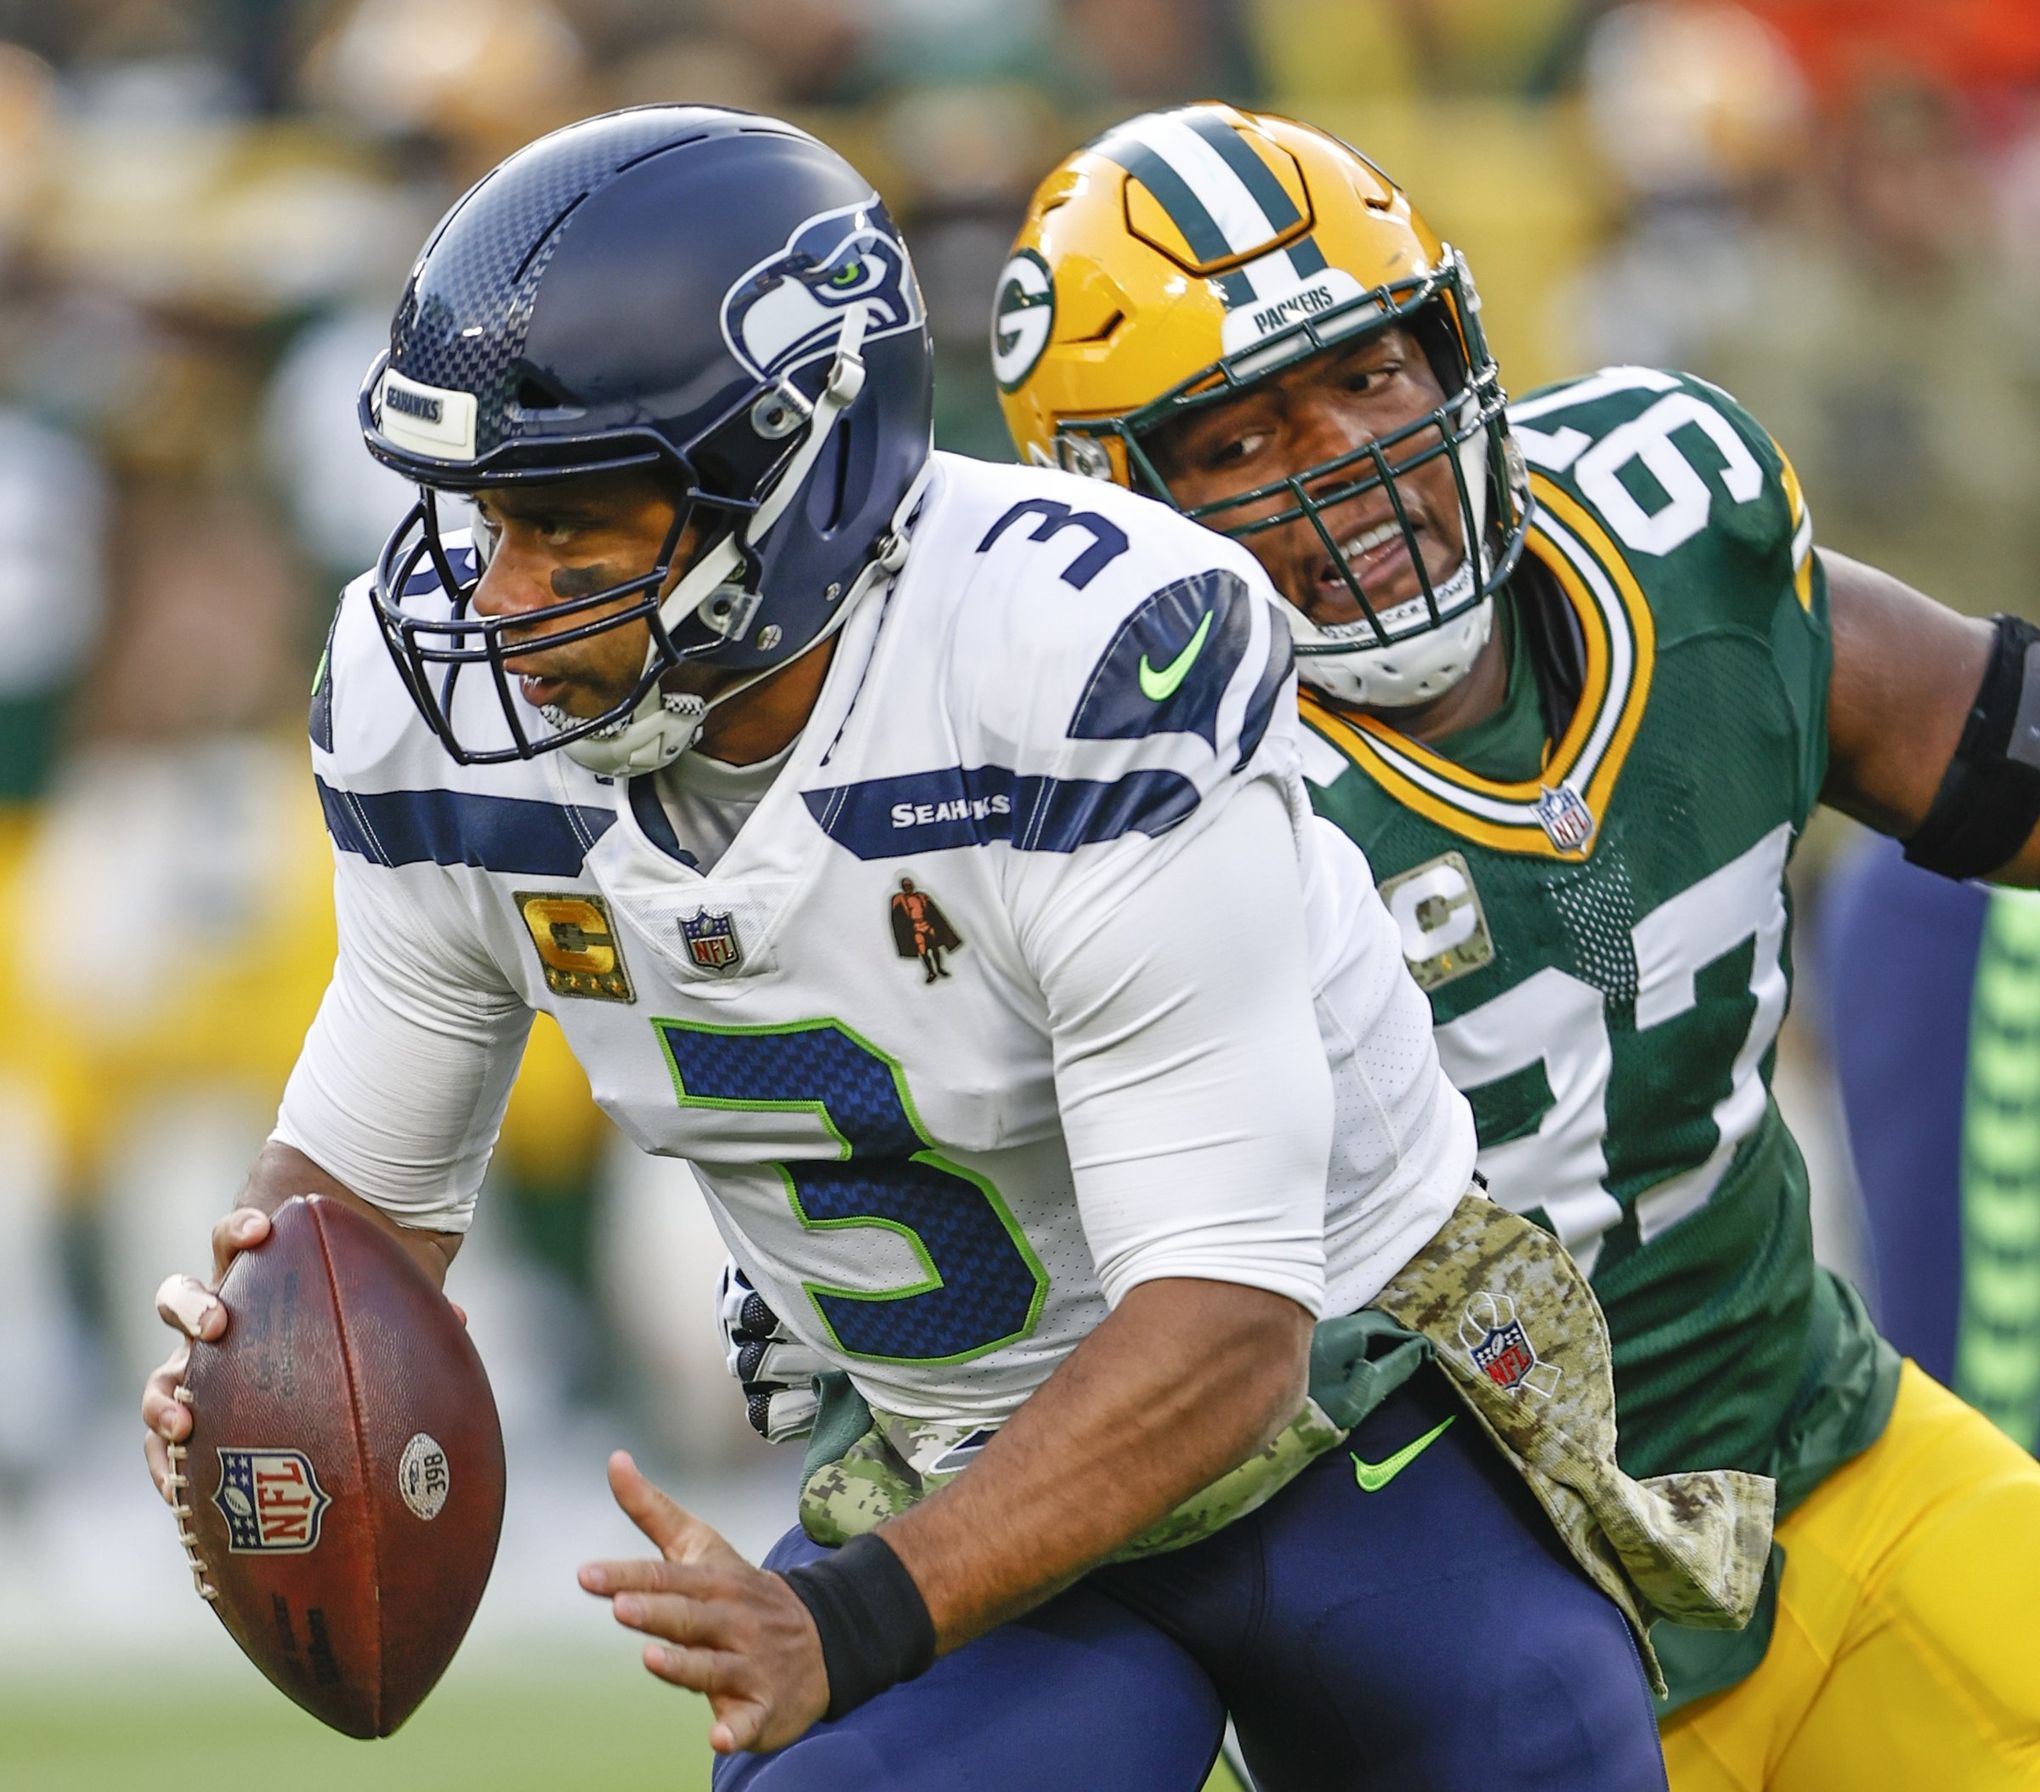 Seattle doesn't look built to make a run': National media react to